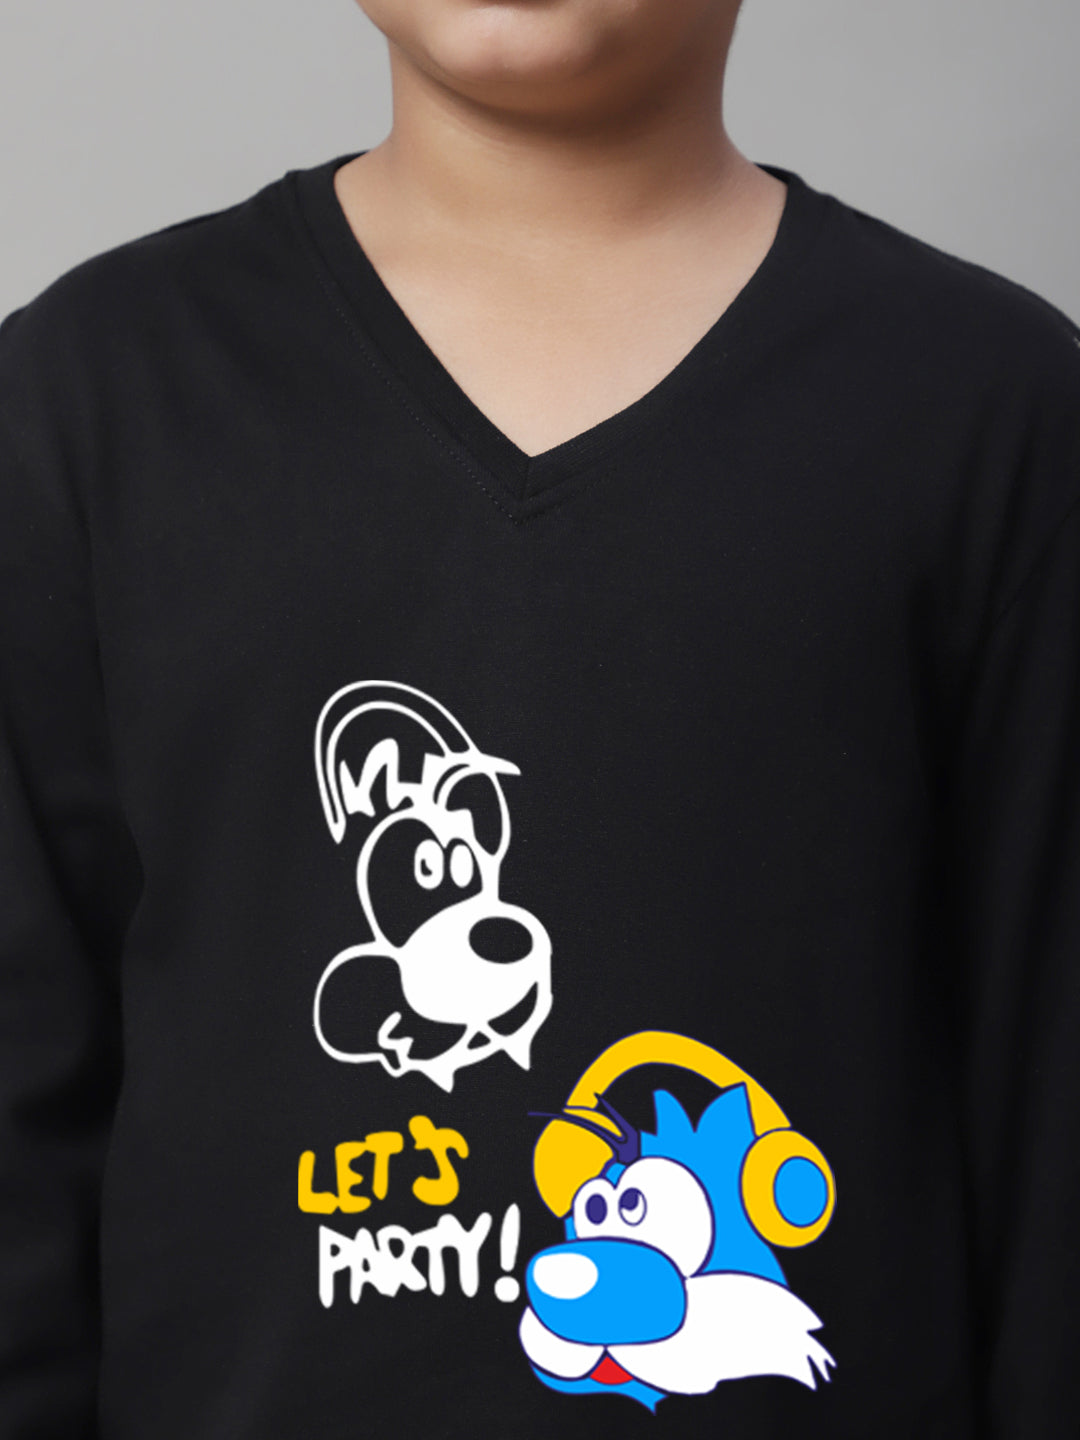 Boys Lets Party Full Sleeves Printed T-Shirt - Friskers